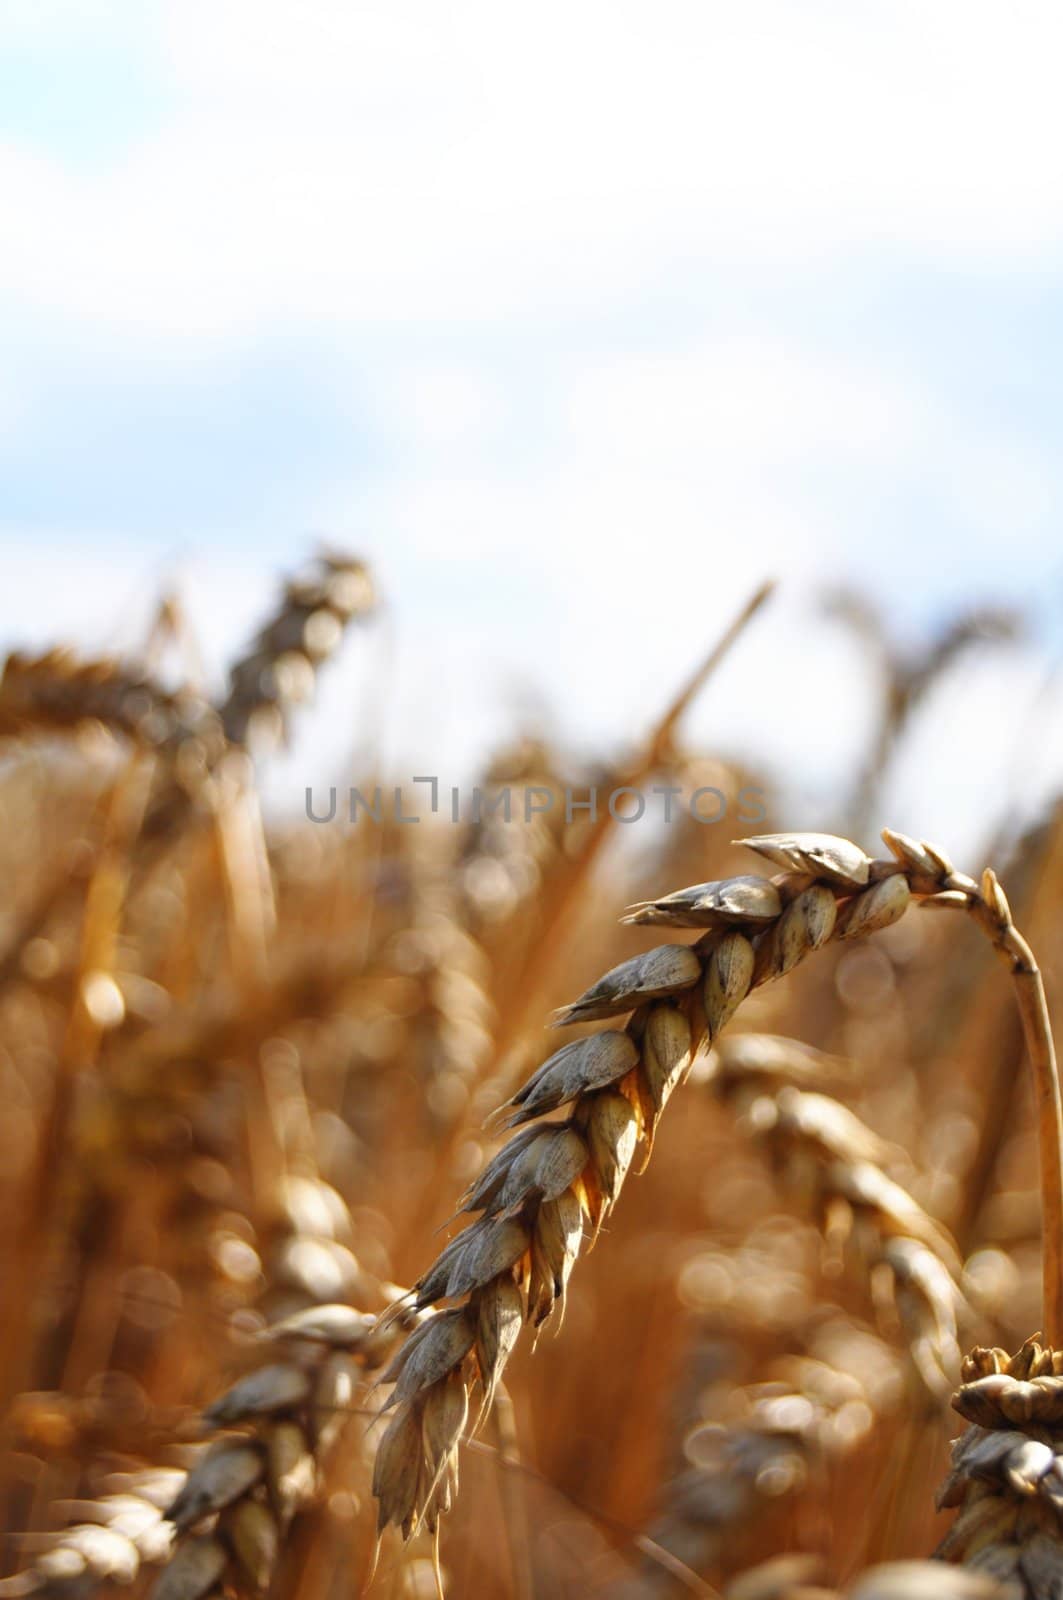 wheet grain on a summer field with sky showing food concept